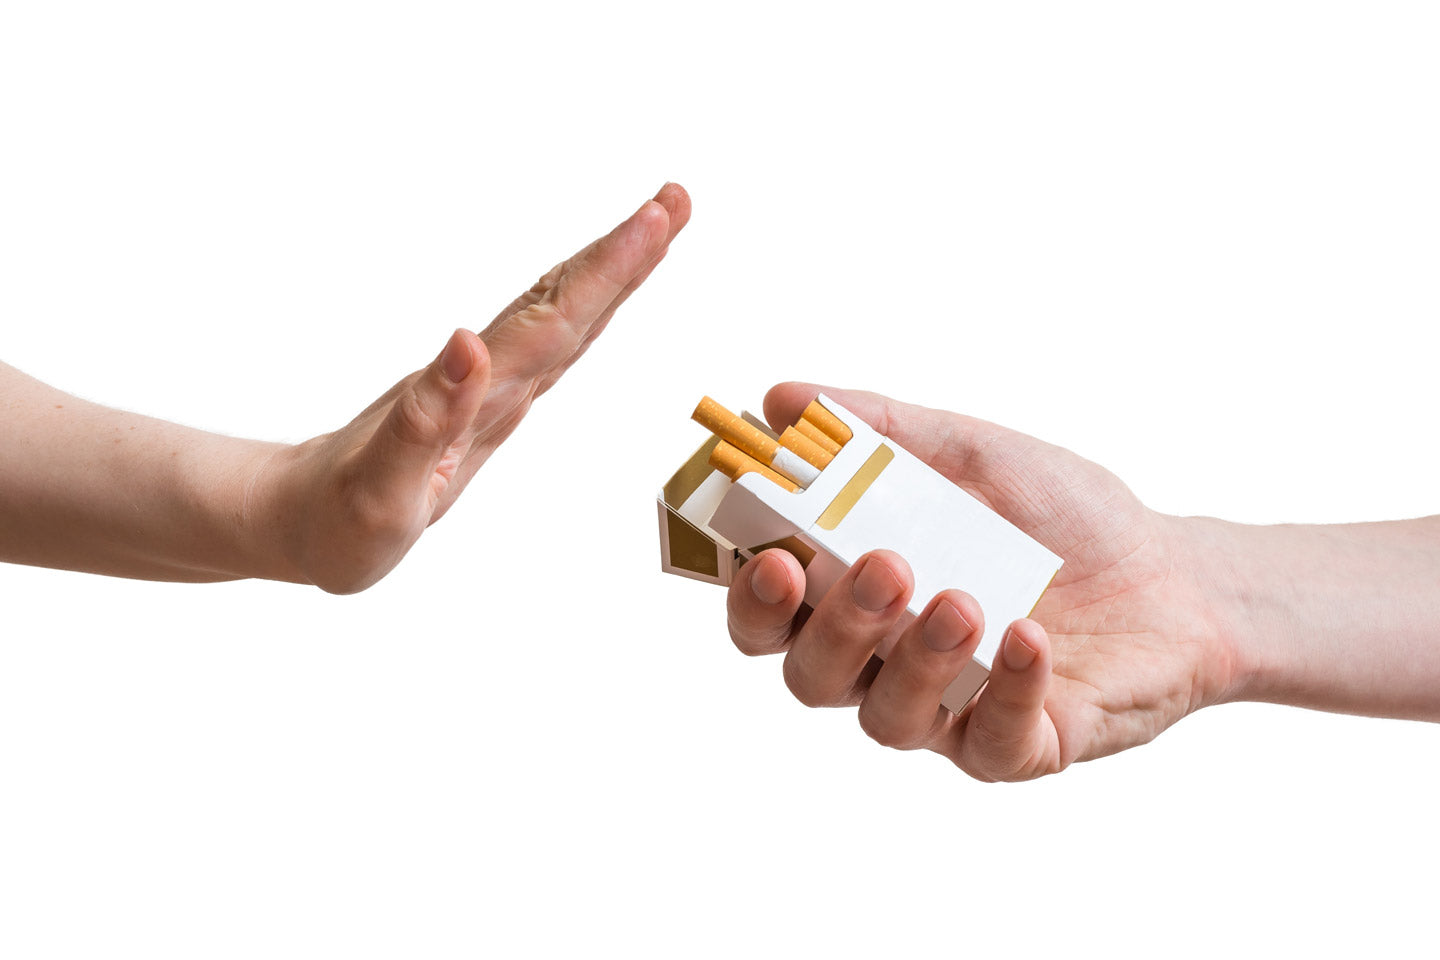 quit smoking on your own terms